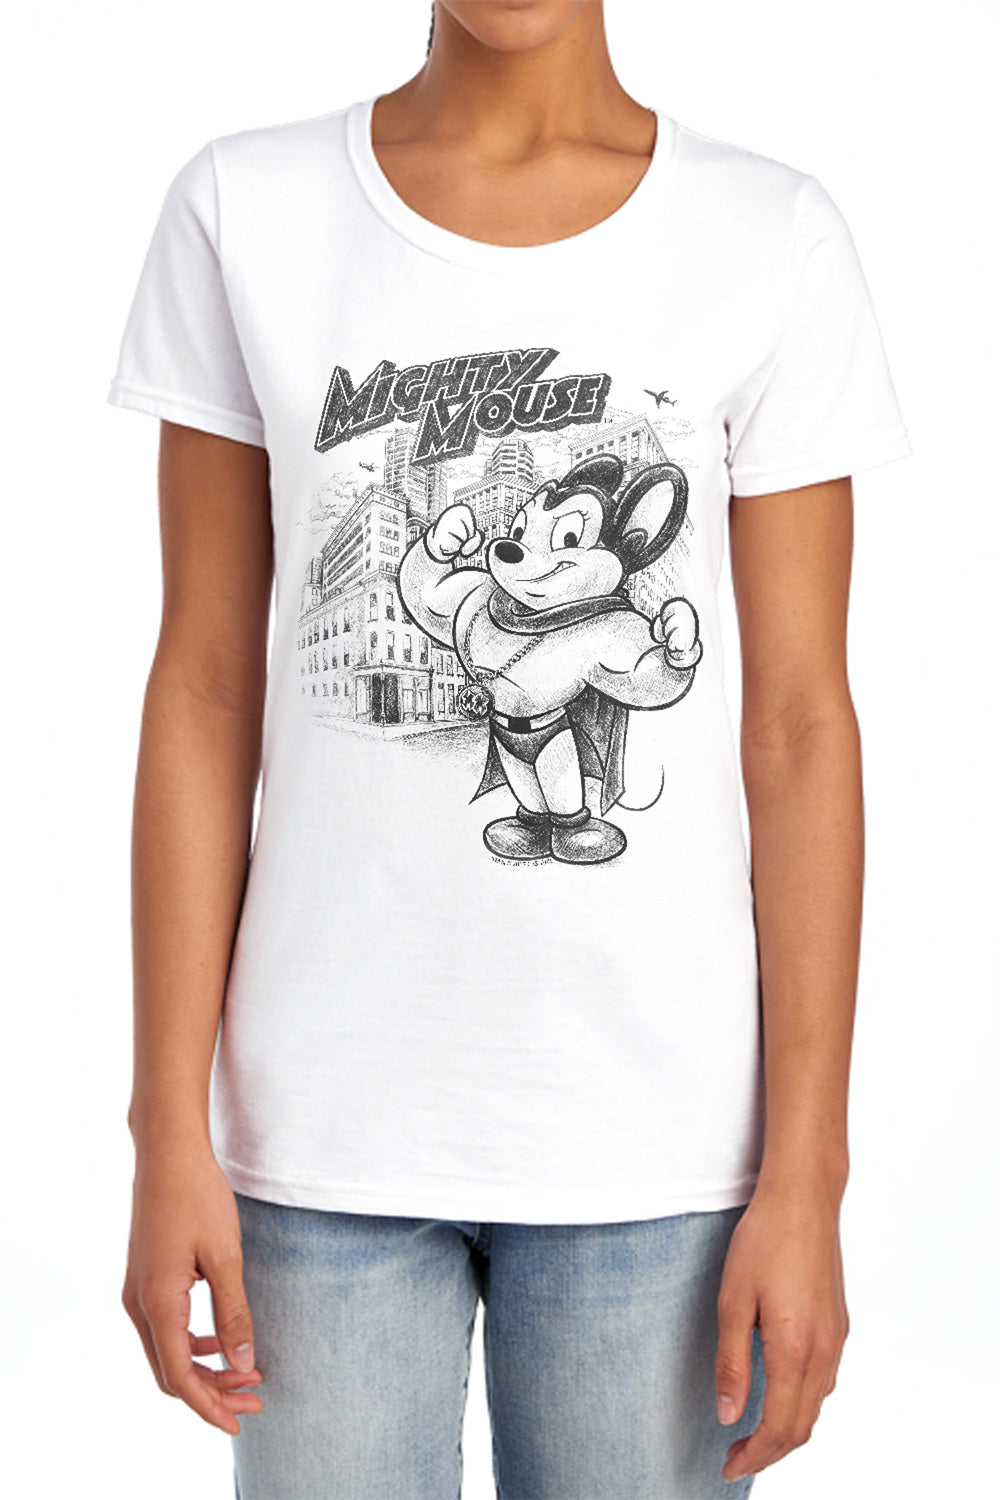 Mighty Mouse - Protect And Serve - Short Sleeve Womens Tee - White T-shirt